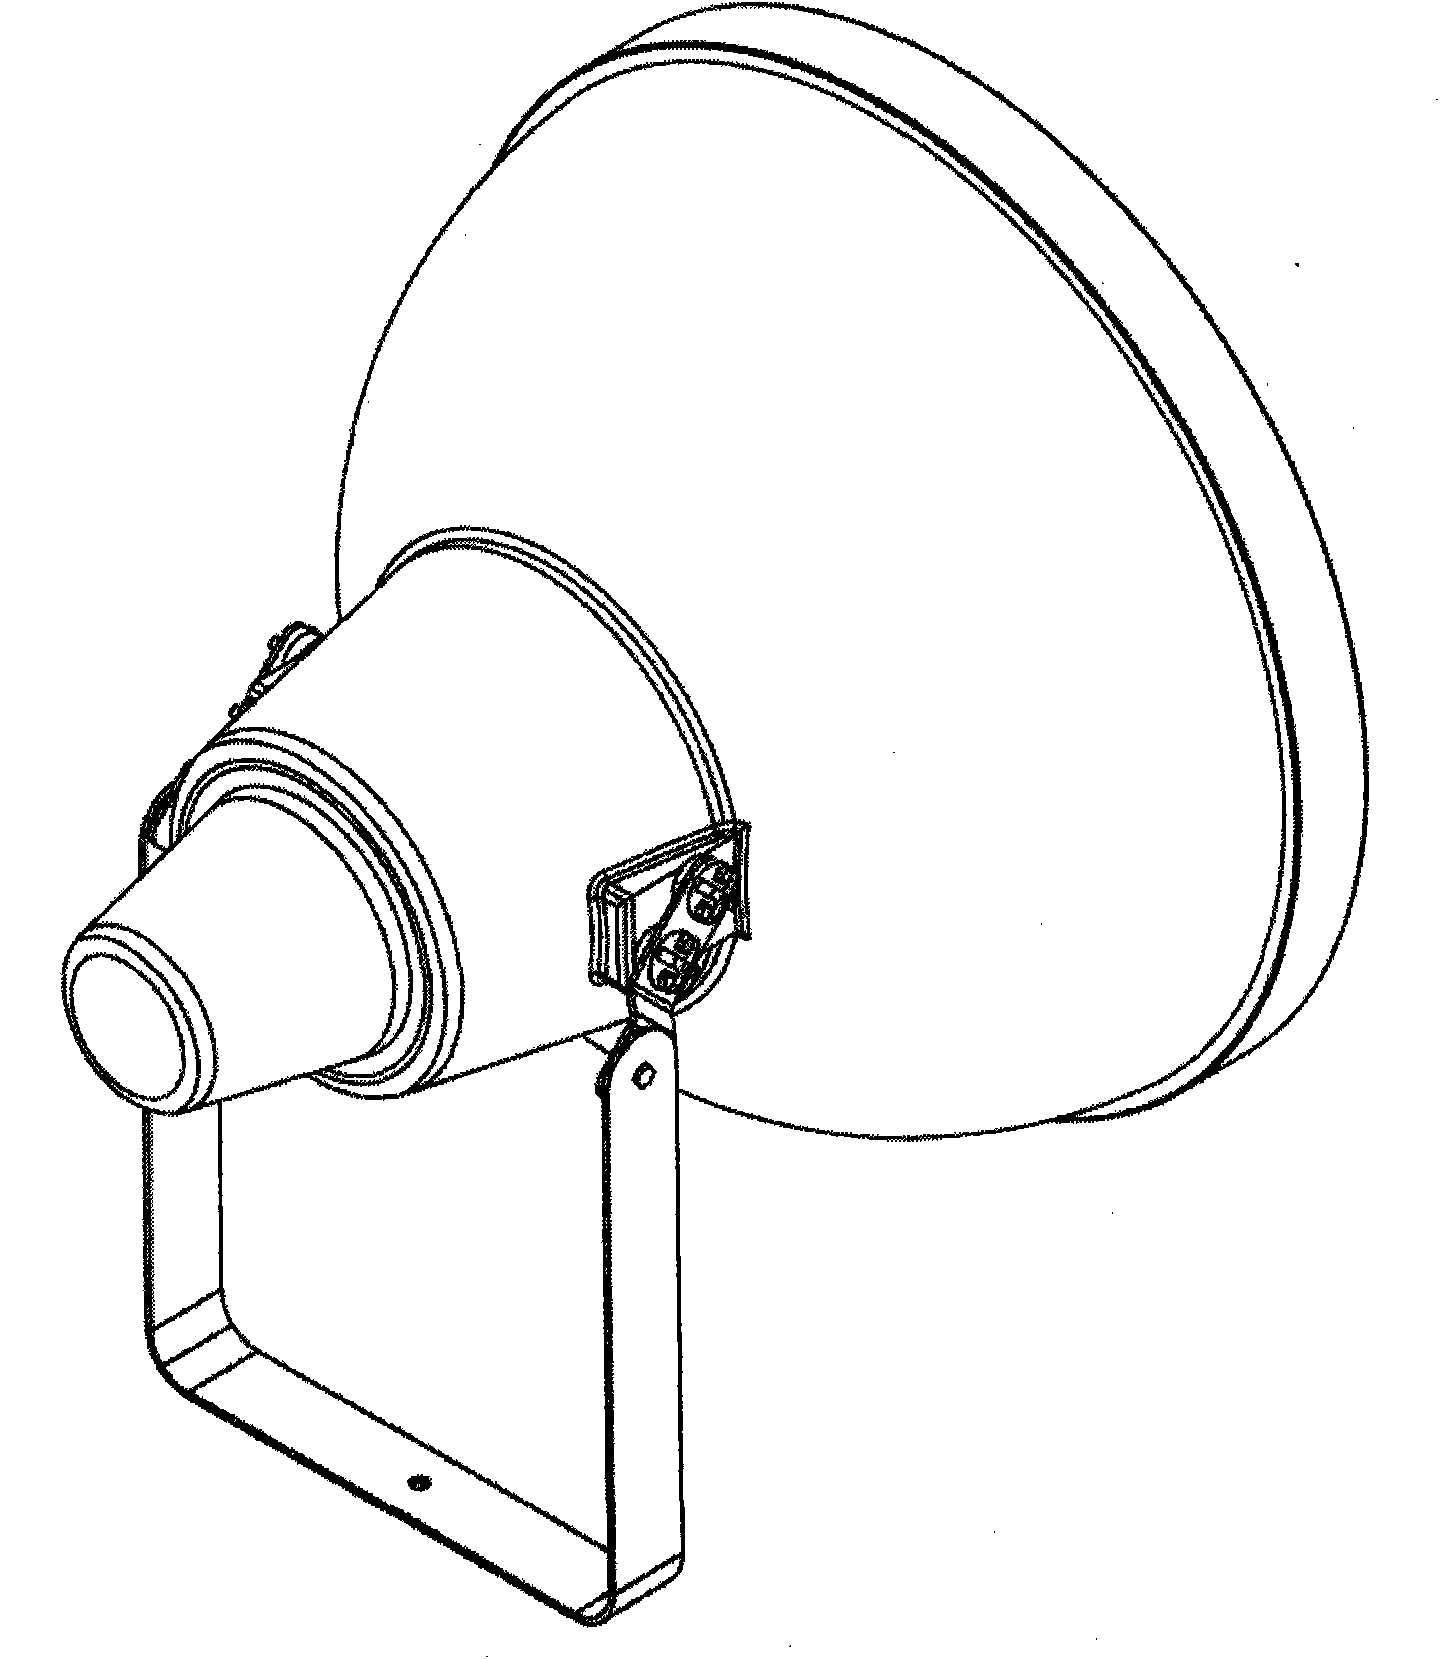 Vibration isolation structure of lamp